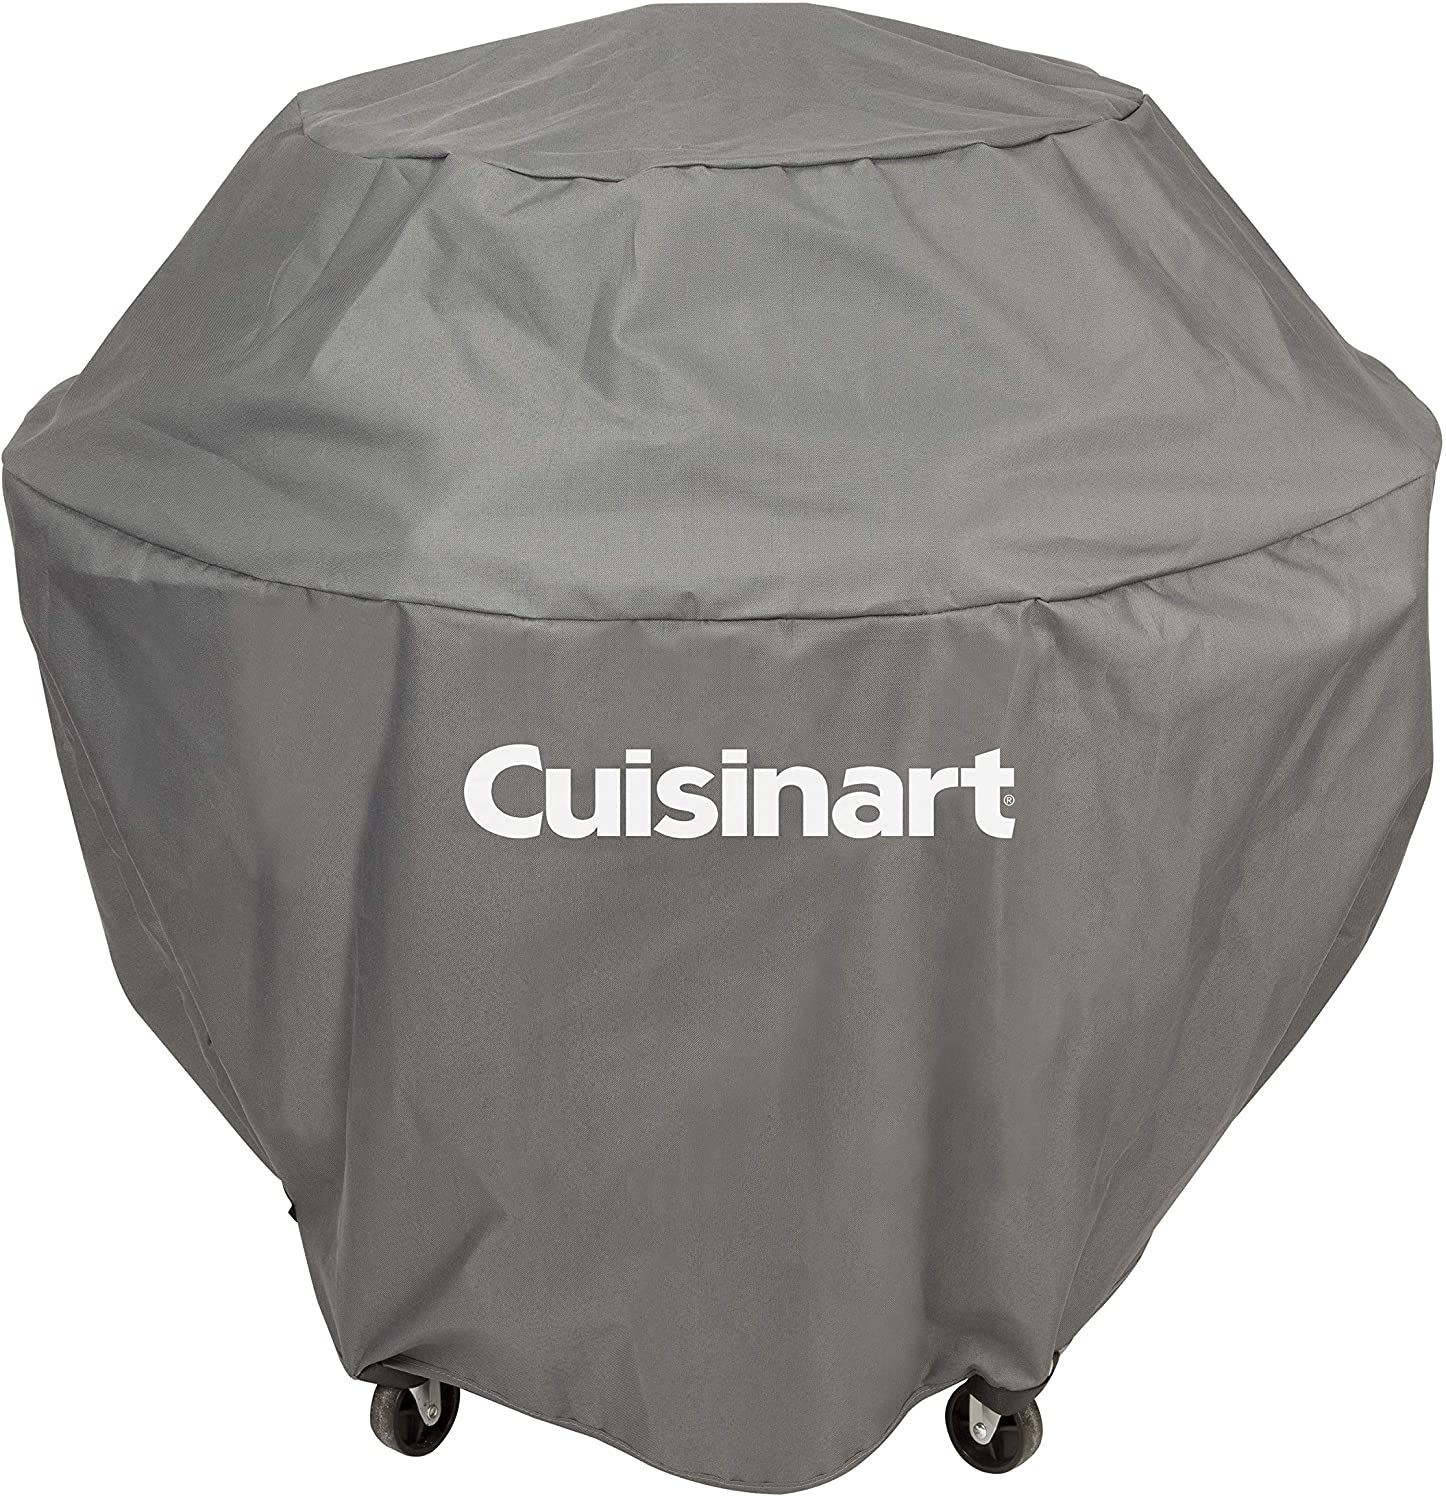 expired - Cuisinart XL 360° Griddle Cover $9.70 + FS w/ Prime or Walmart+